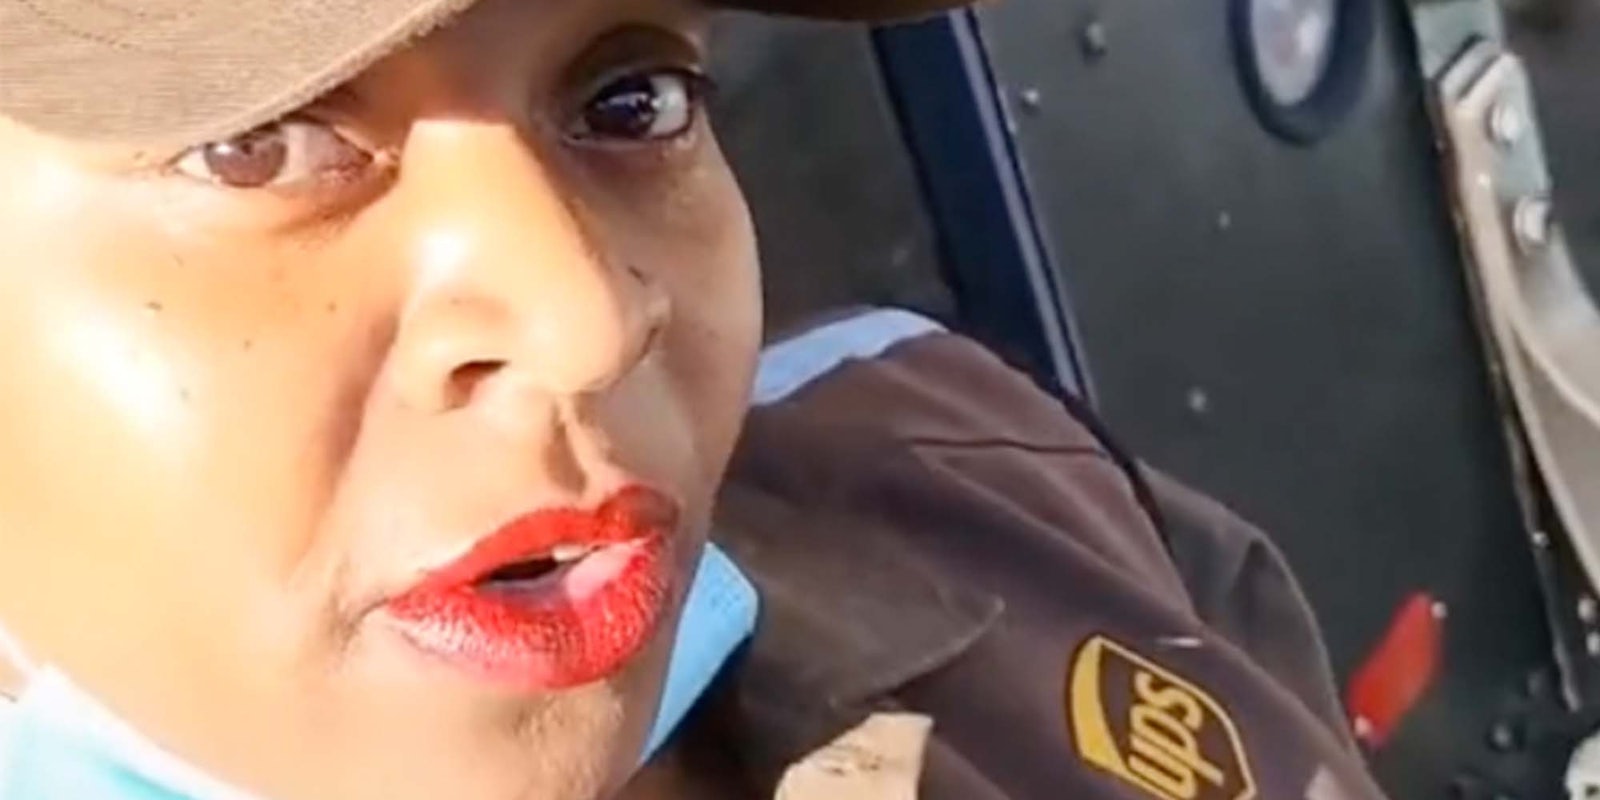 In a TikTok, a UPS driver says she was racially profiled.